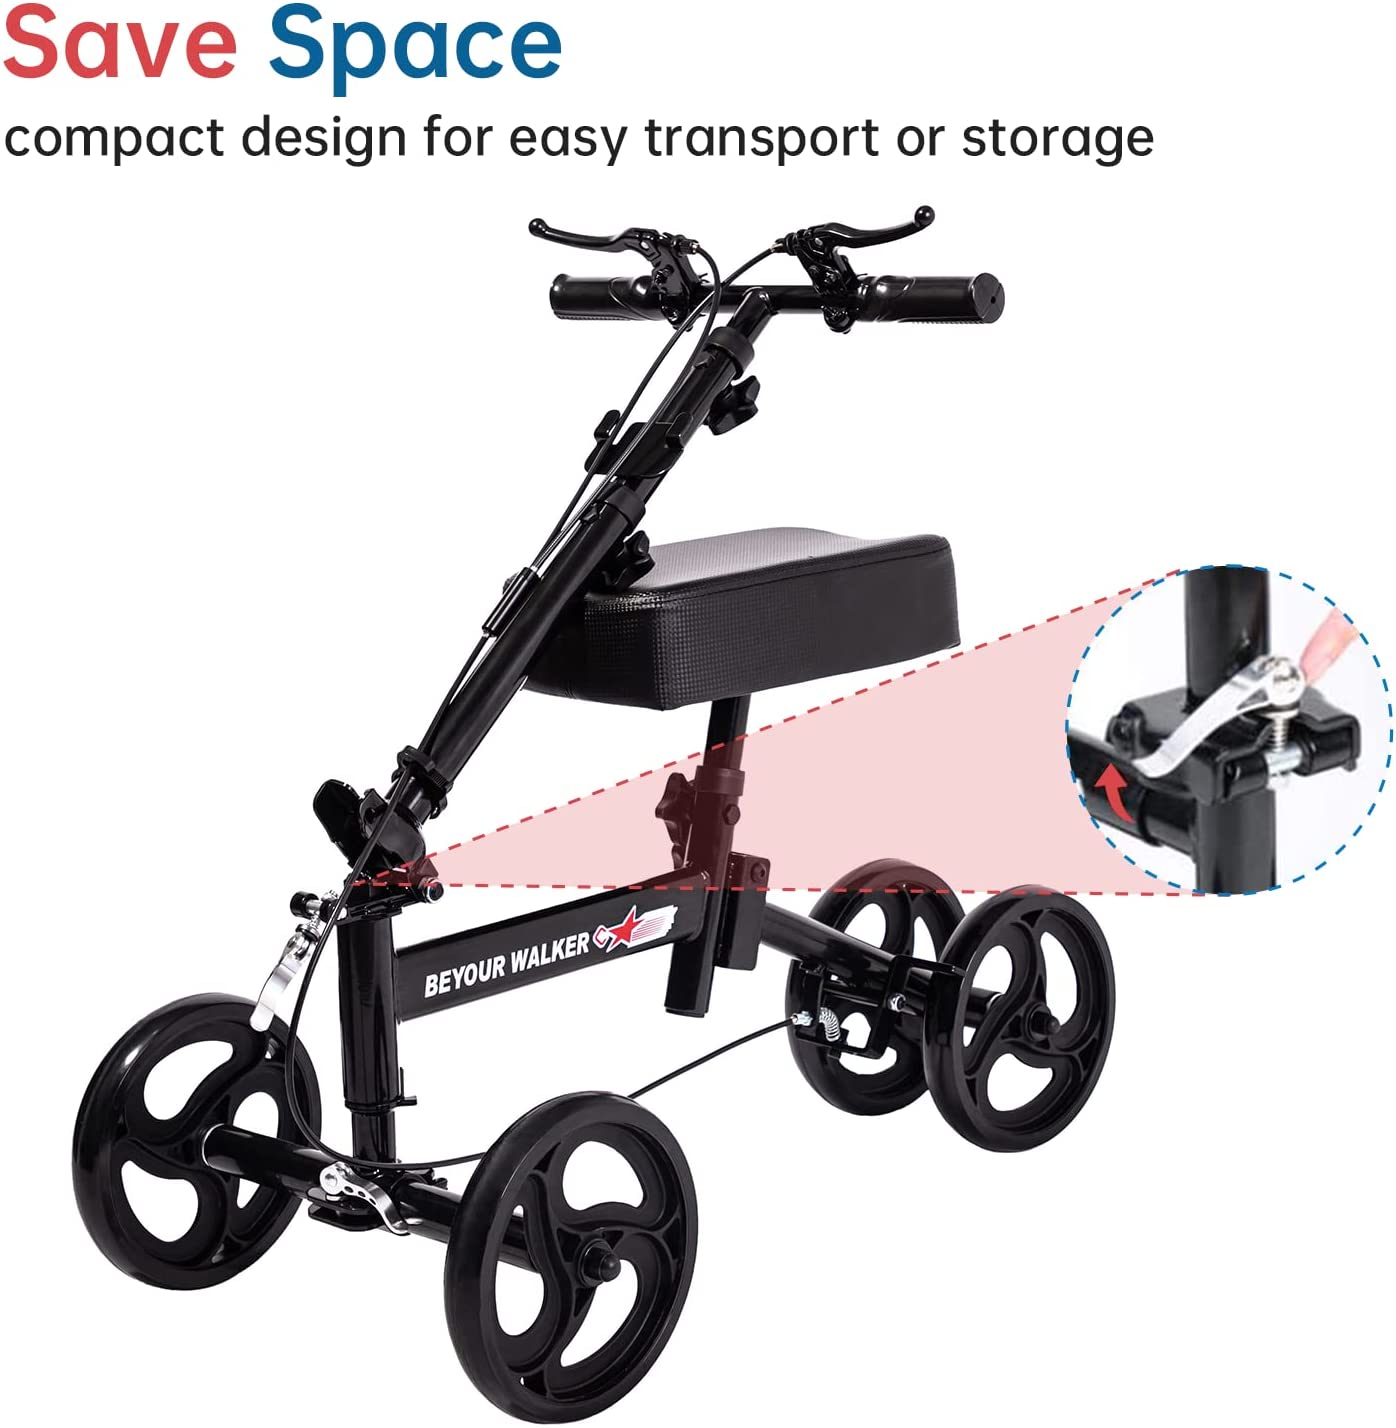 ELENKER® Knee Walker Scooter for Foot/Ankle/Leg Injuries & Recovery